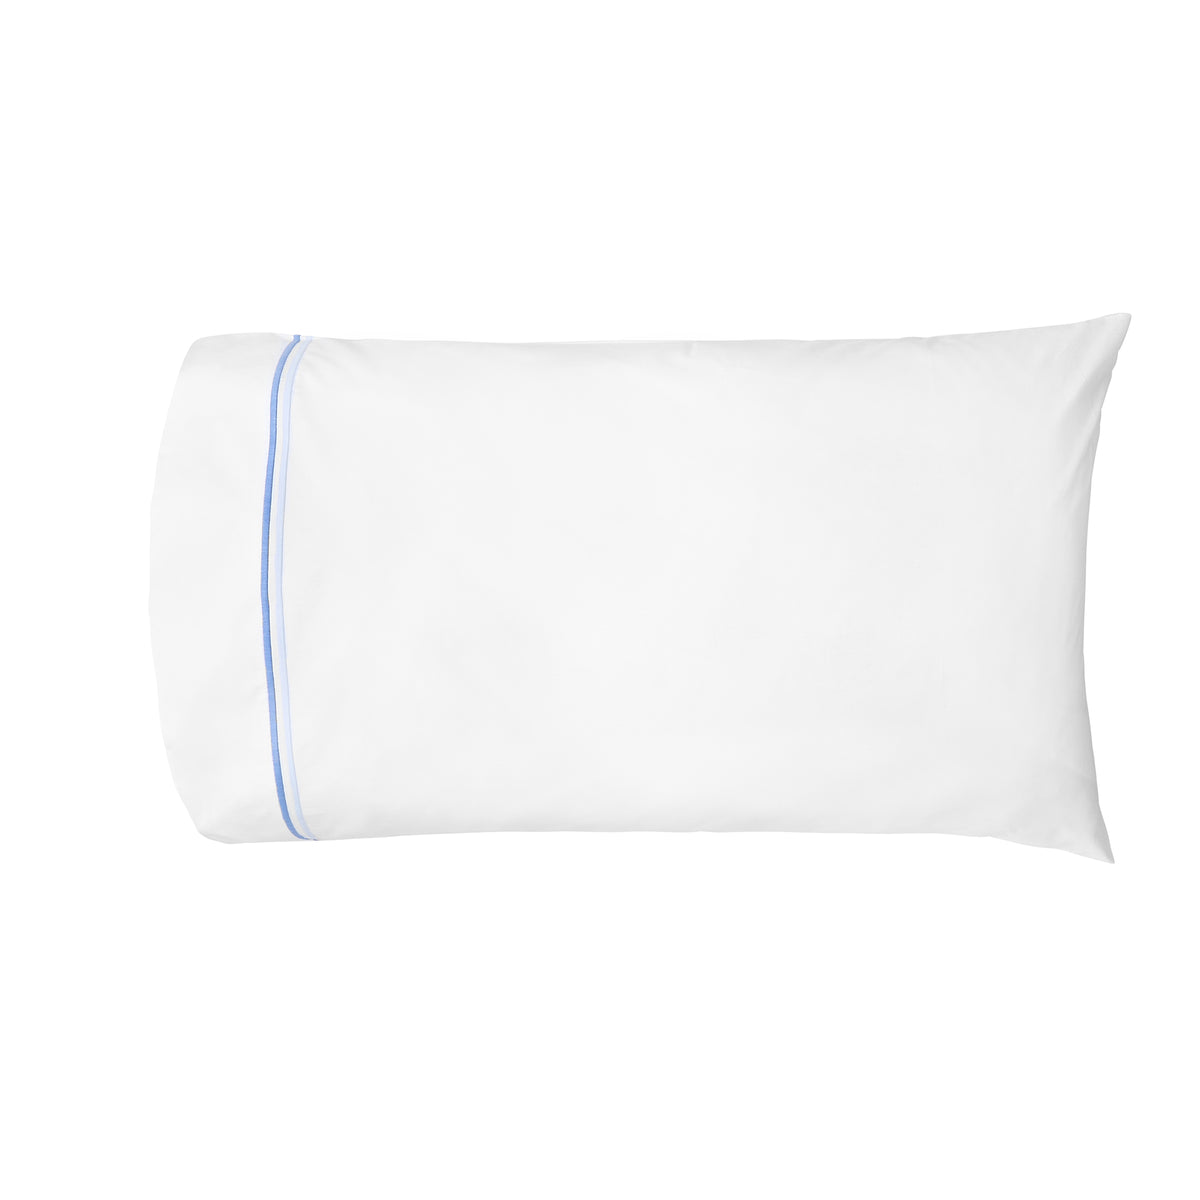 Essex Pillowcase in White and Azure Blue